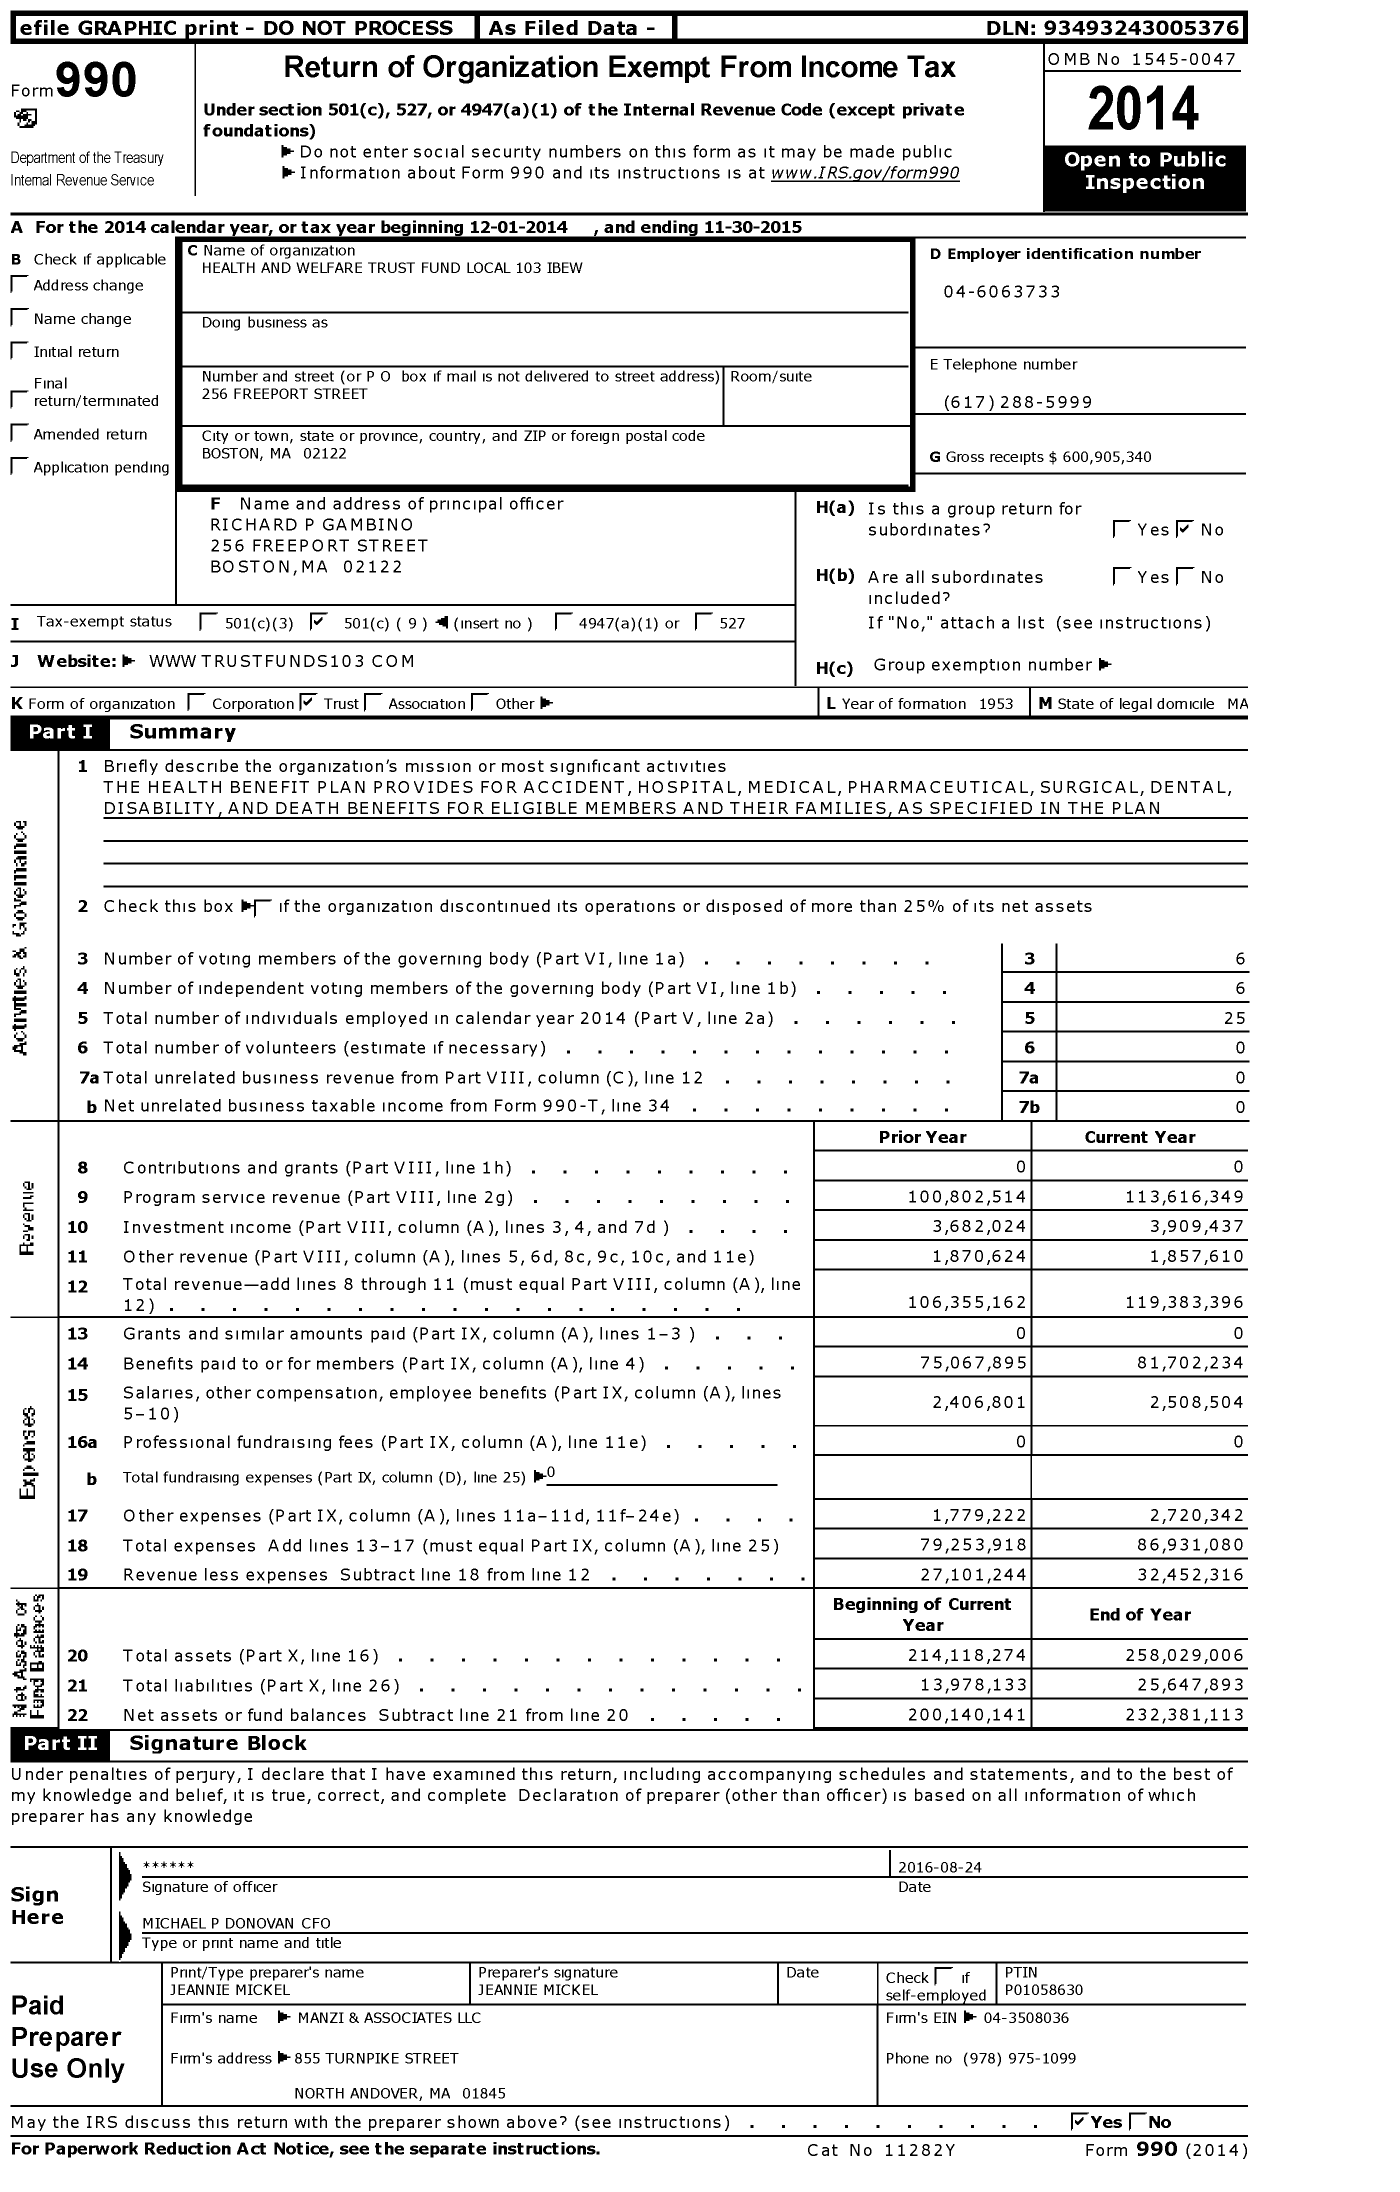 Image of first page of 2014 Form 990O for Health and Welfare Trust Fund Local 103 IBEW